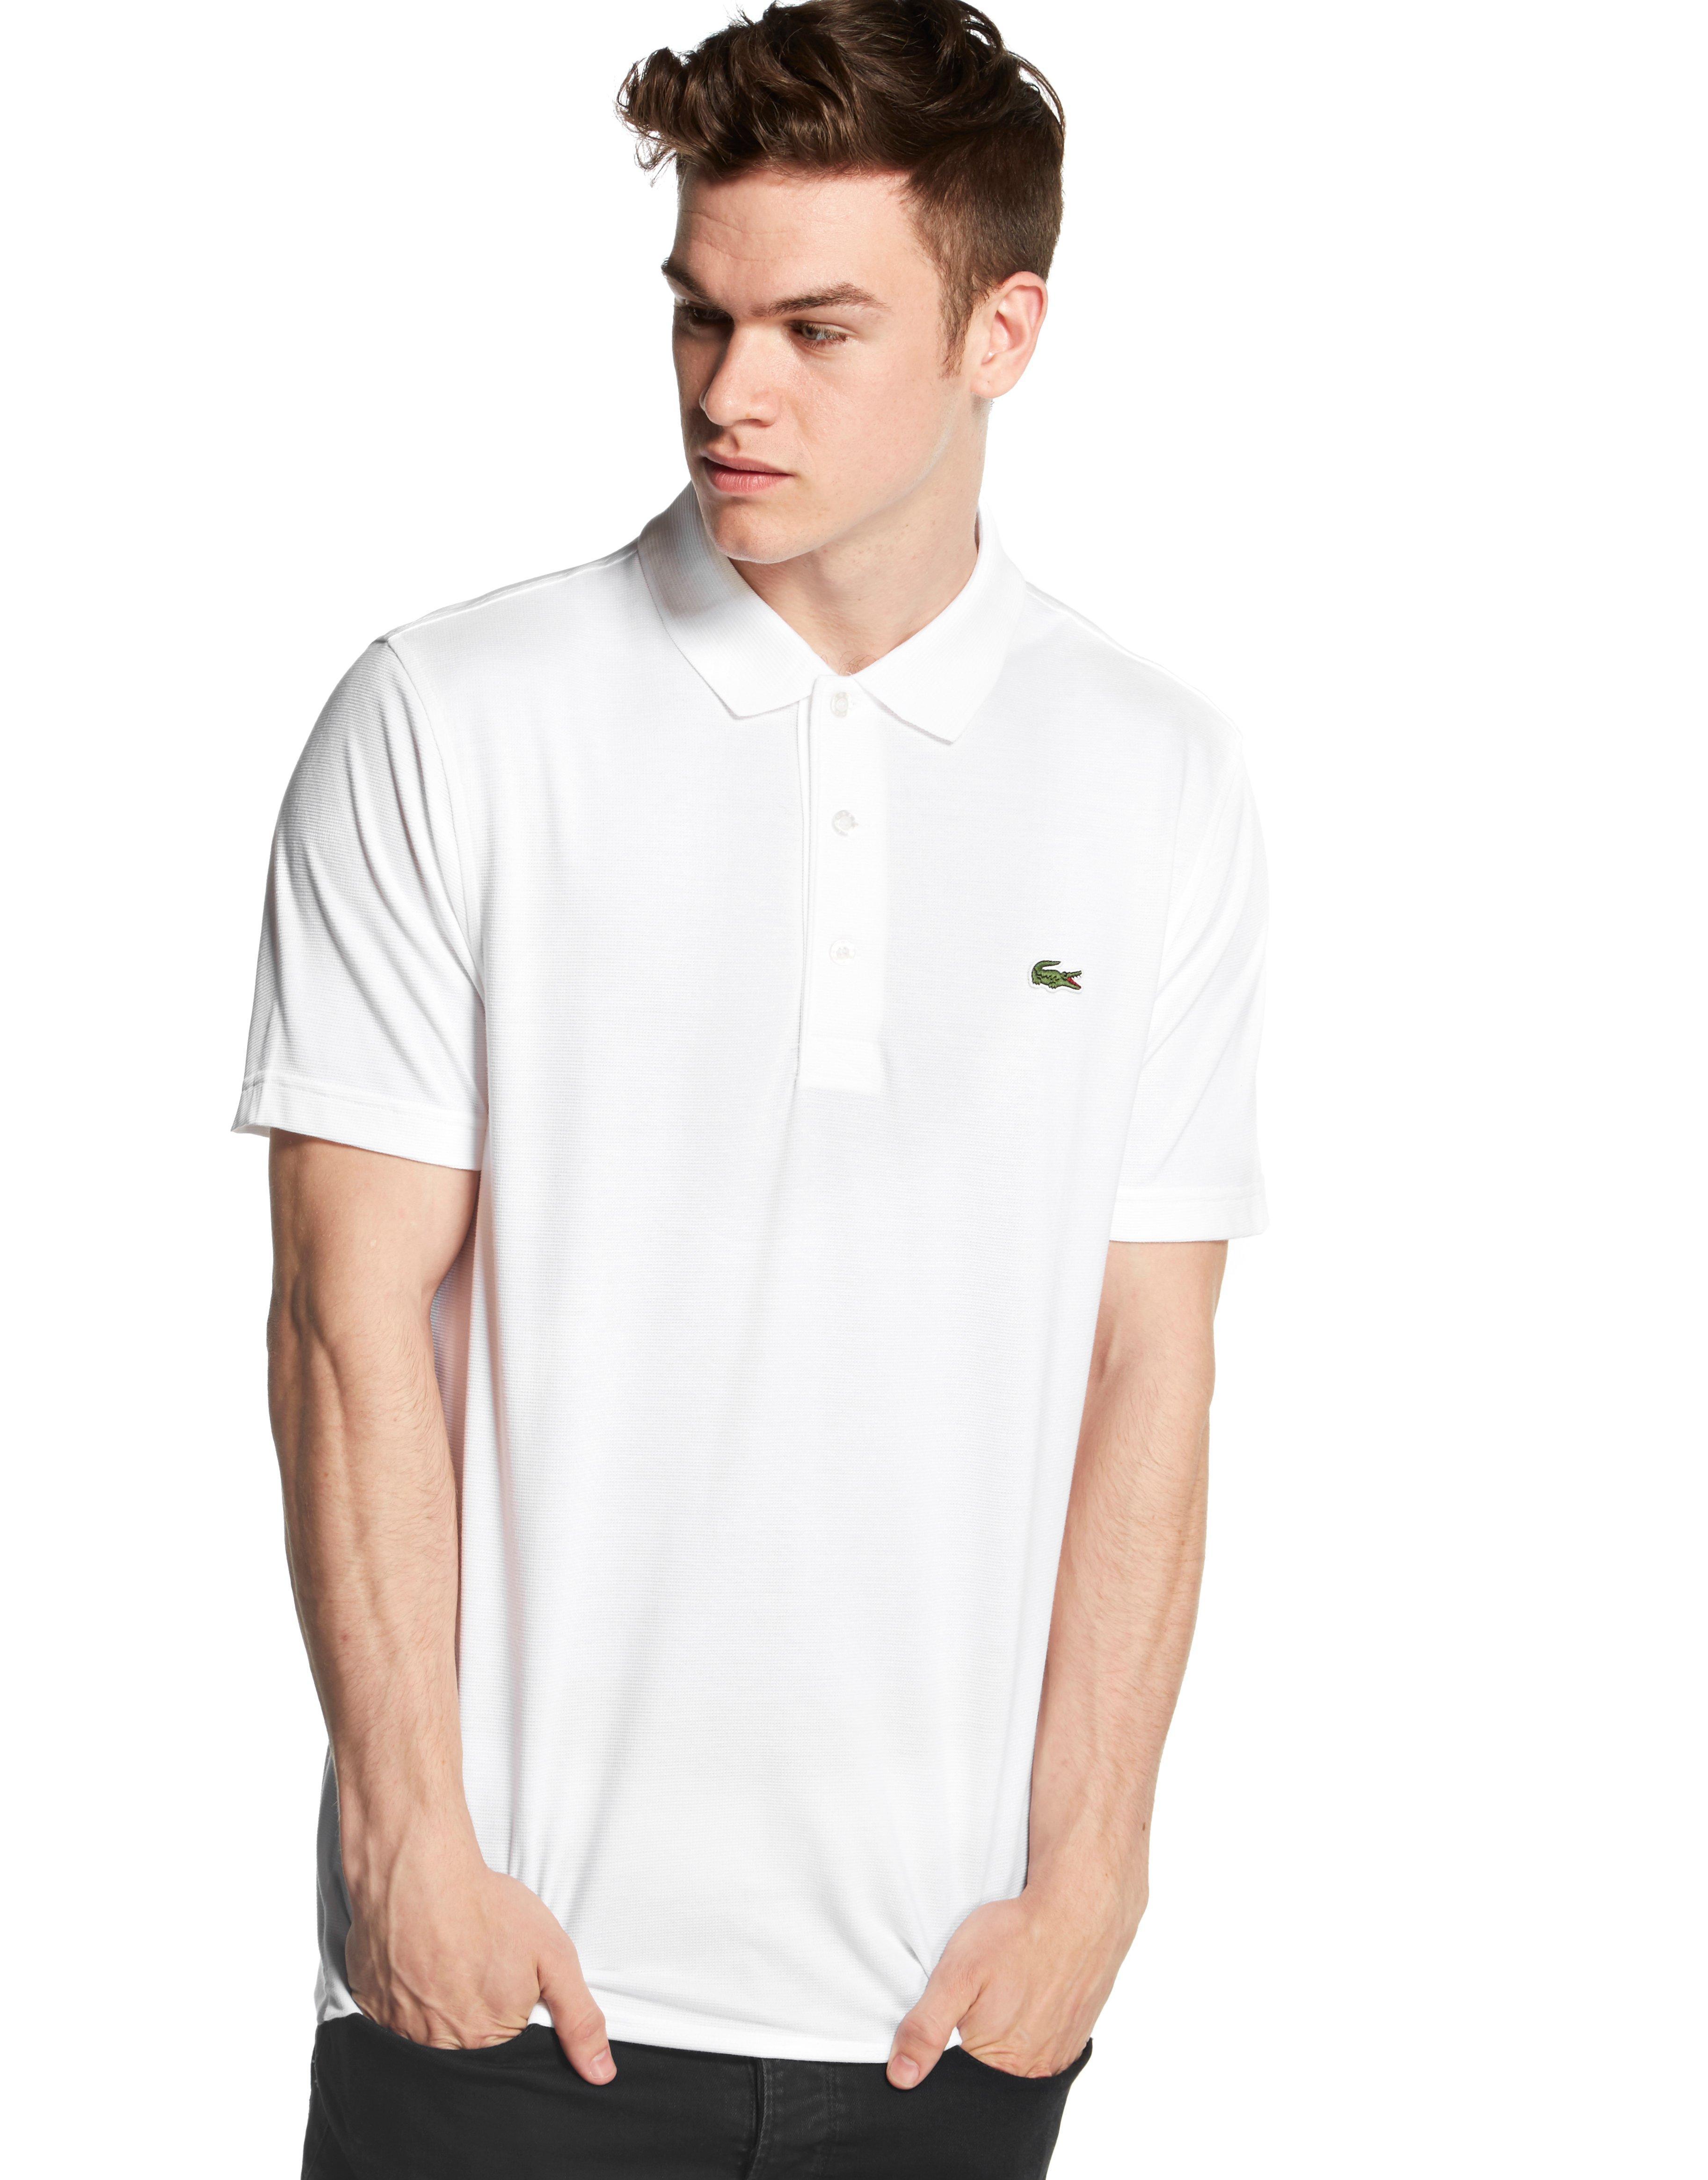 Lyst Lacoste Alligator Short Sleeve Polo  Shirt  in White  